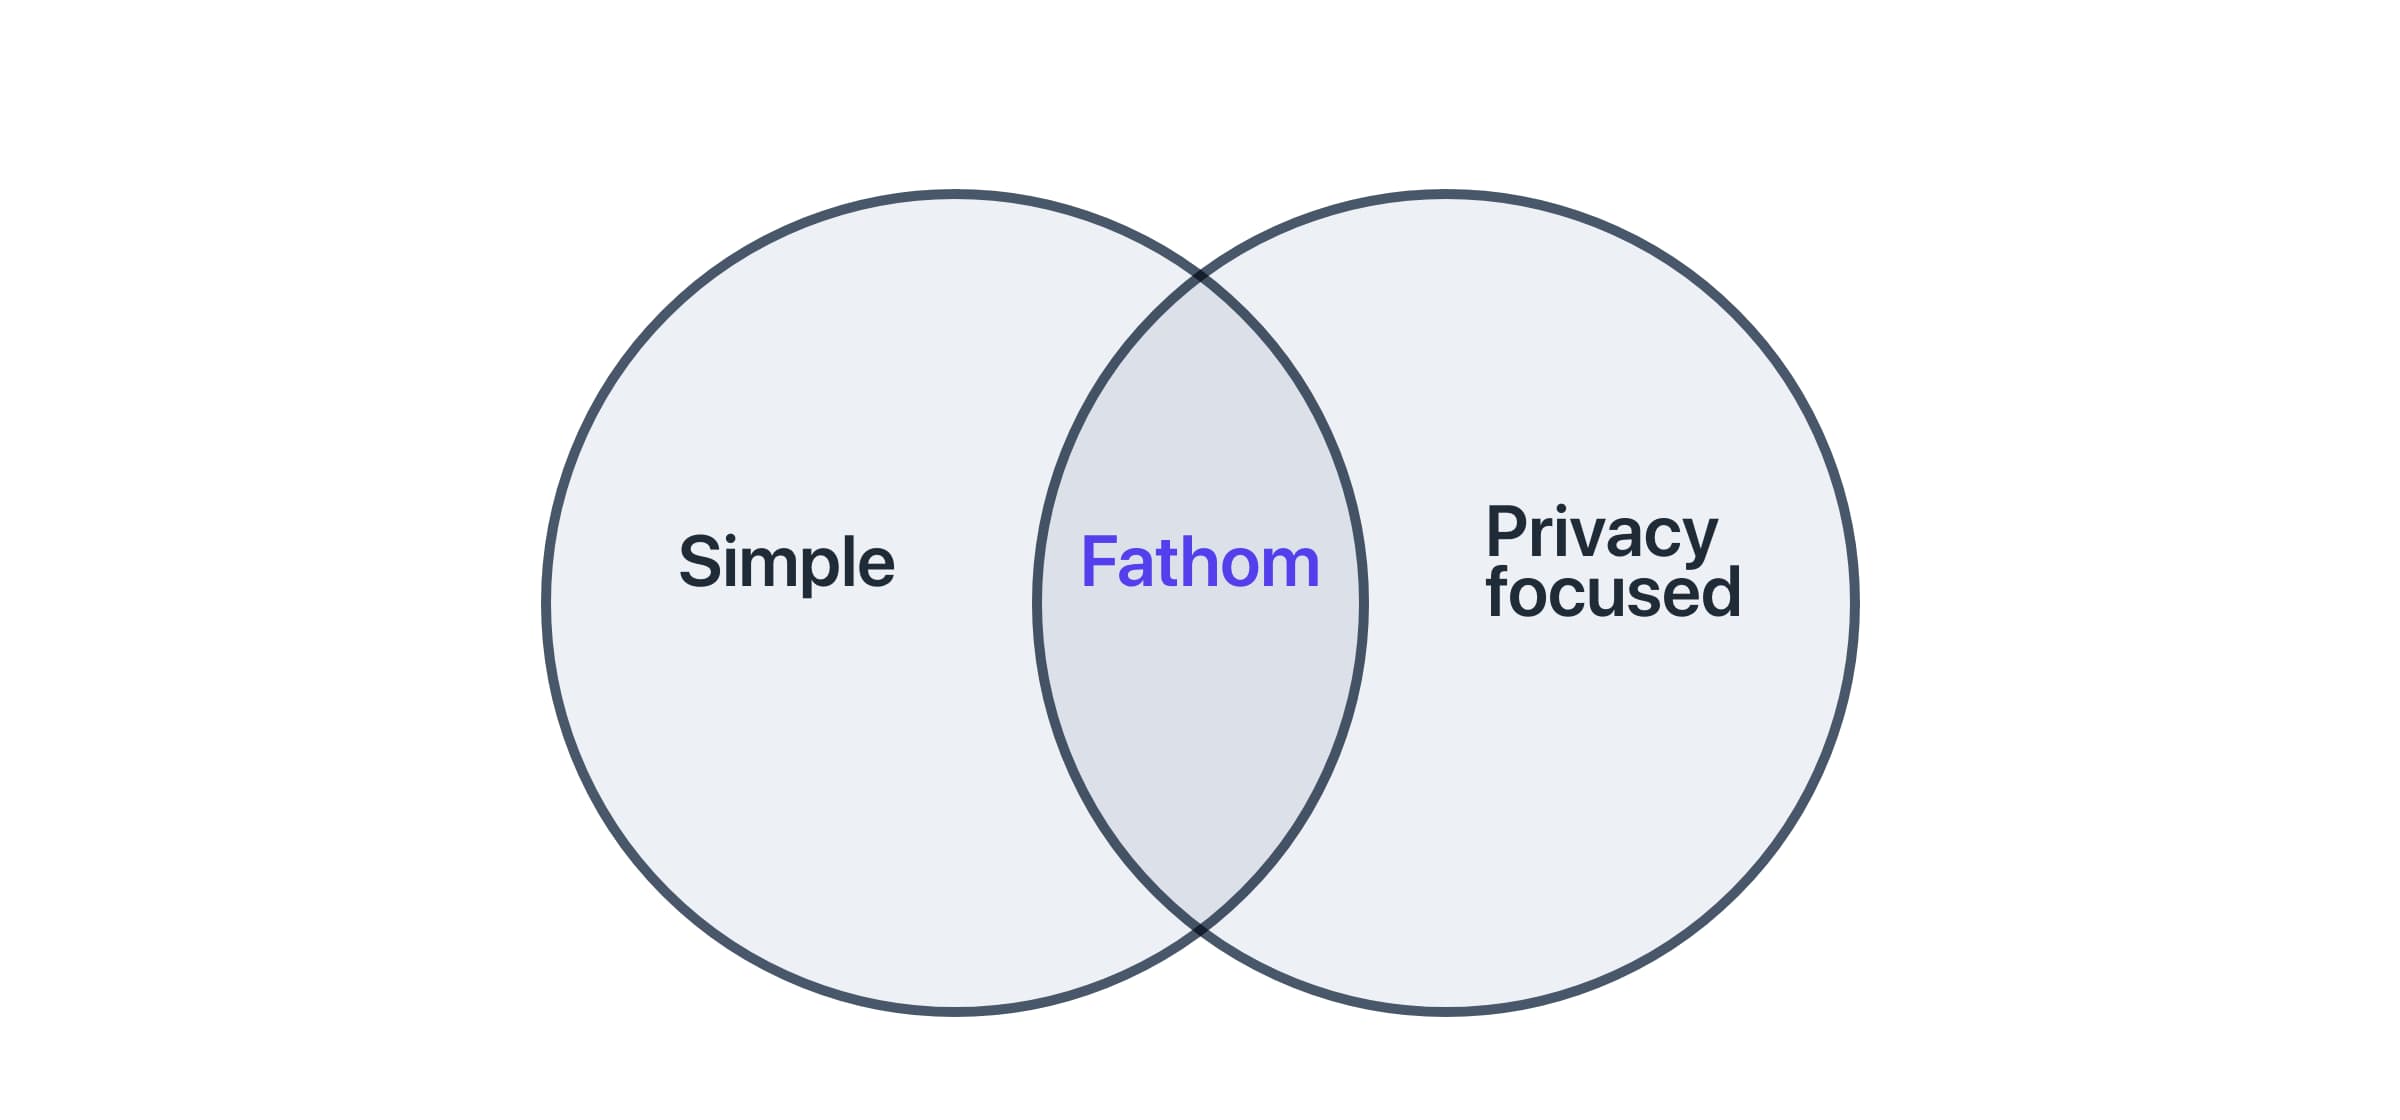 Fathom is both simple and privacy focused